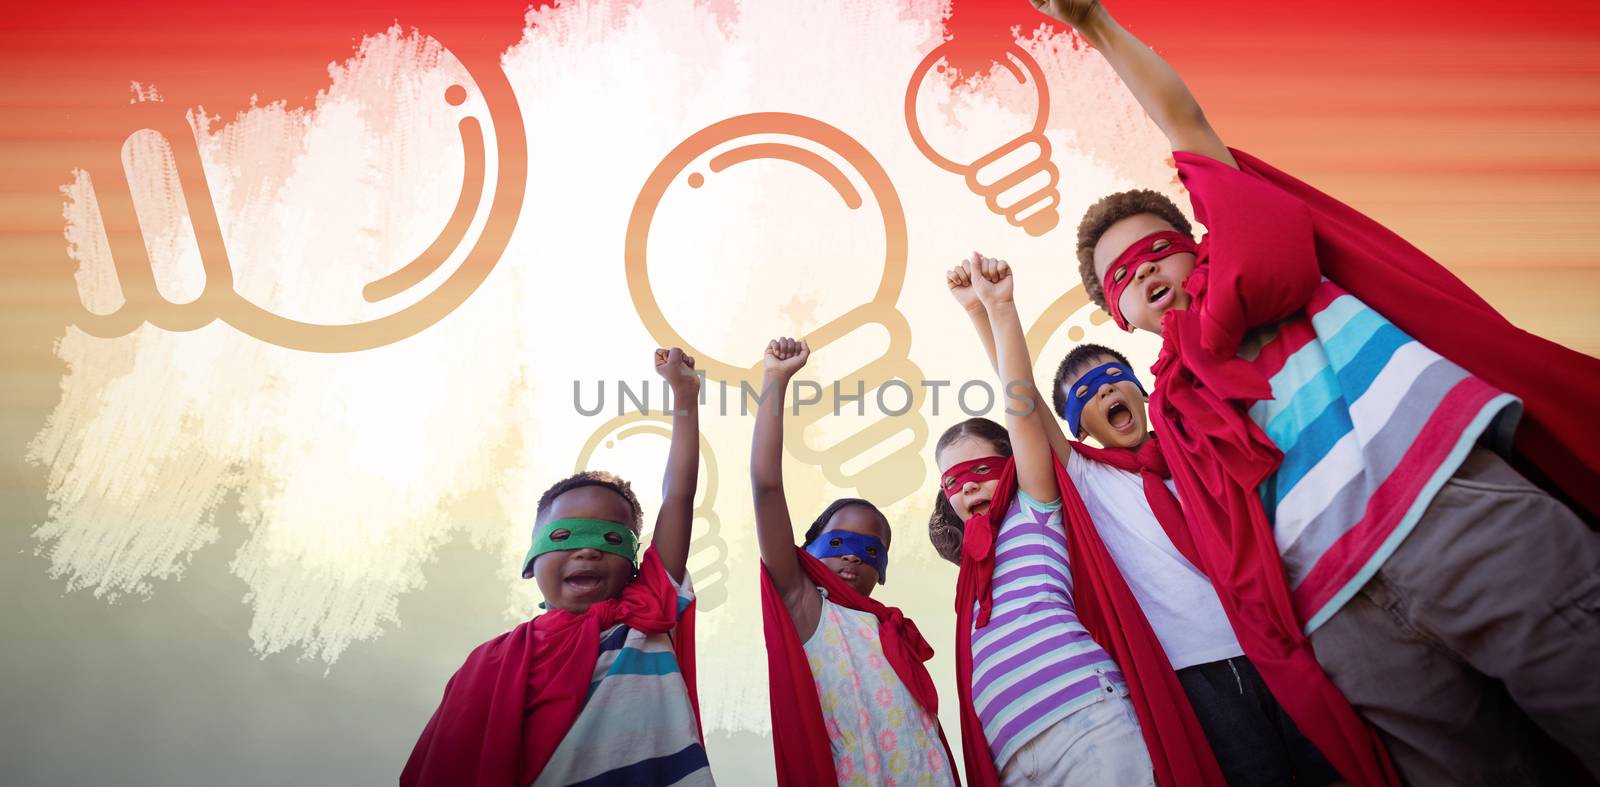 Low angle view of children in superhero costumes against orange and yellow abstract backgrounds